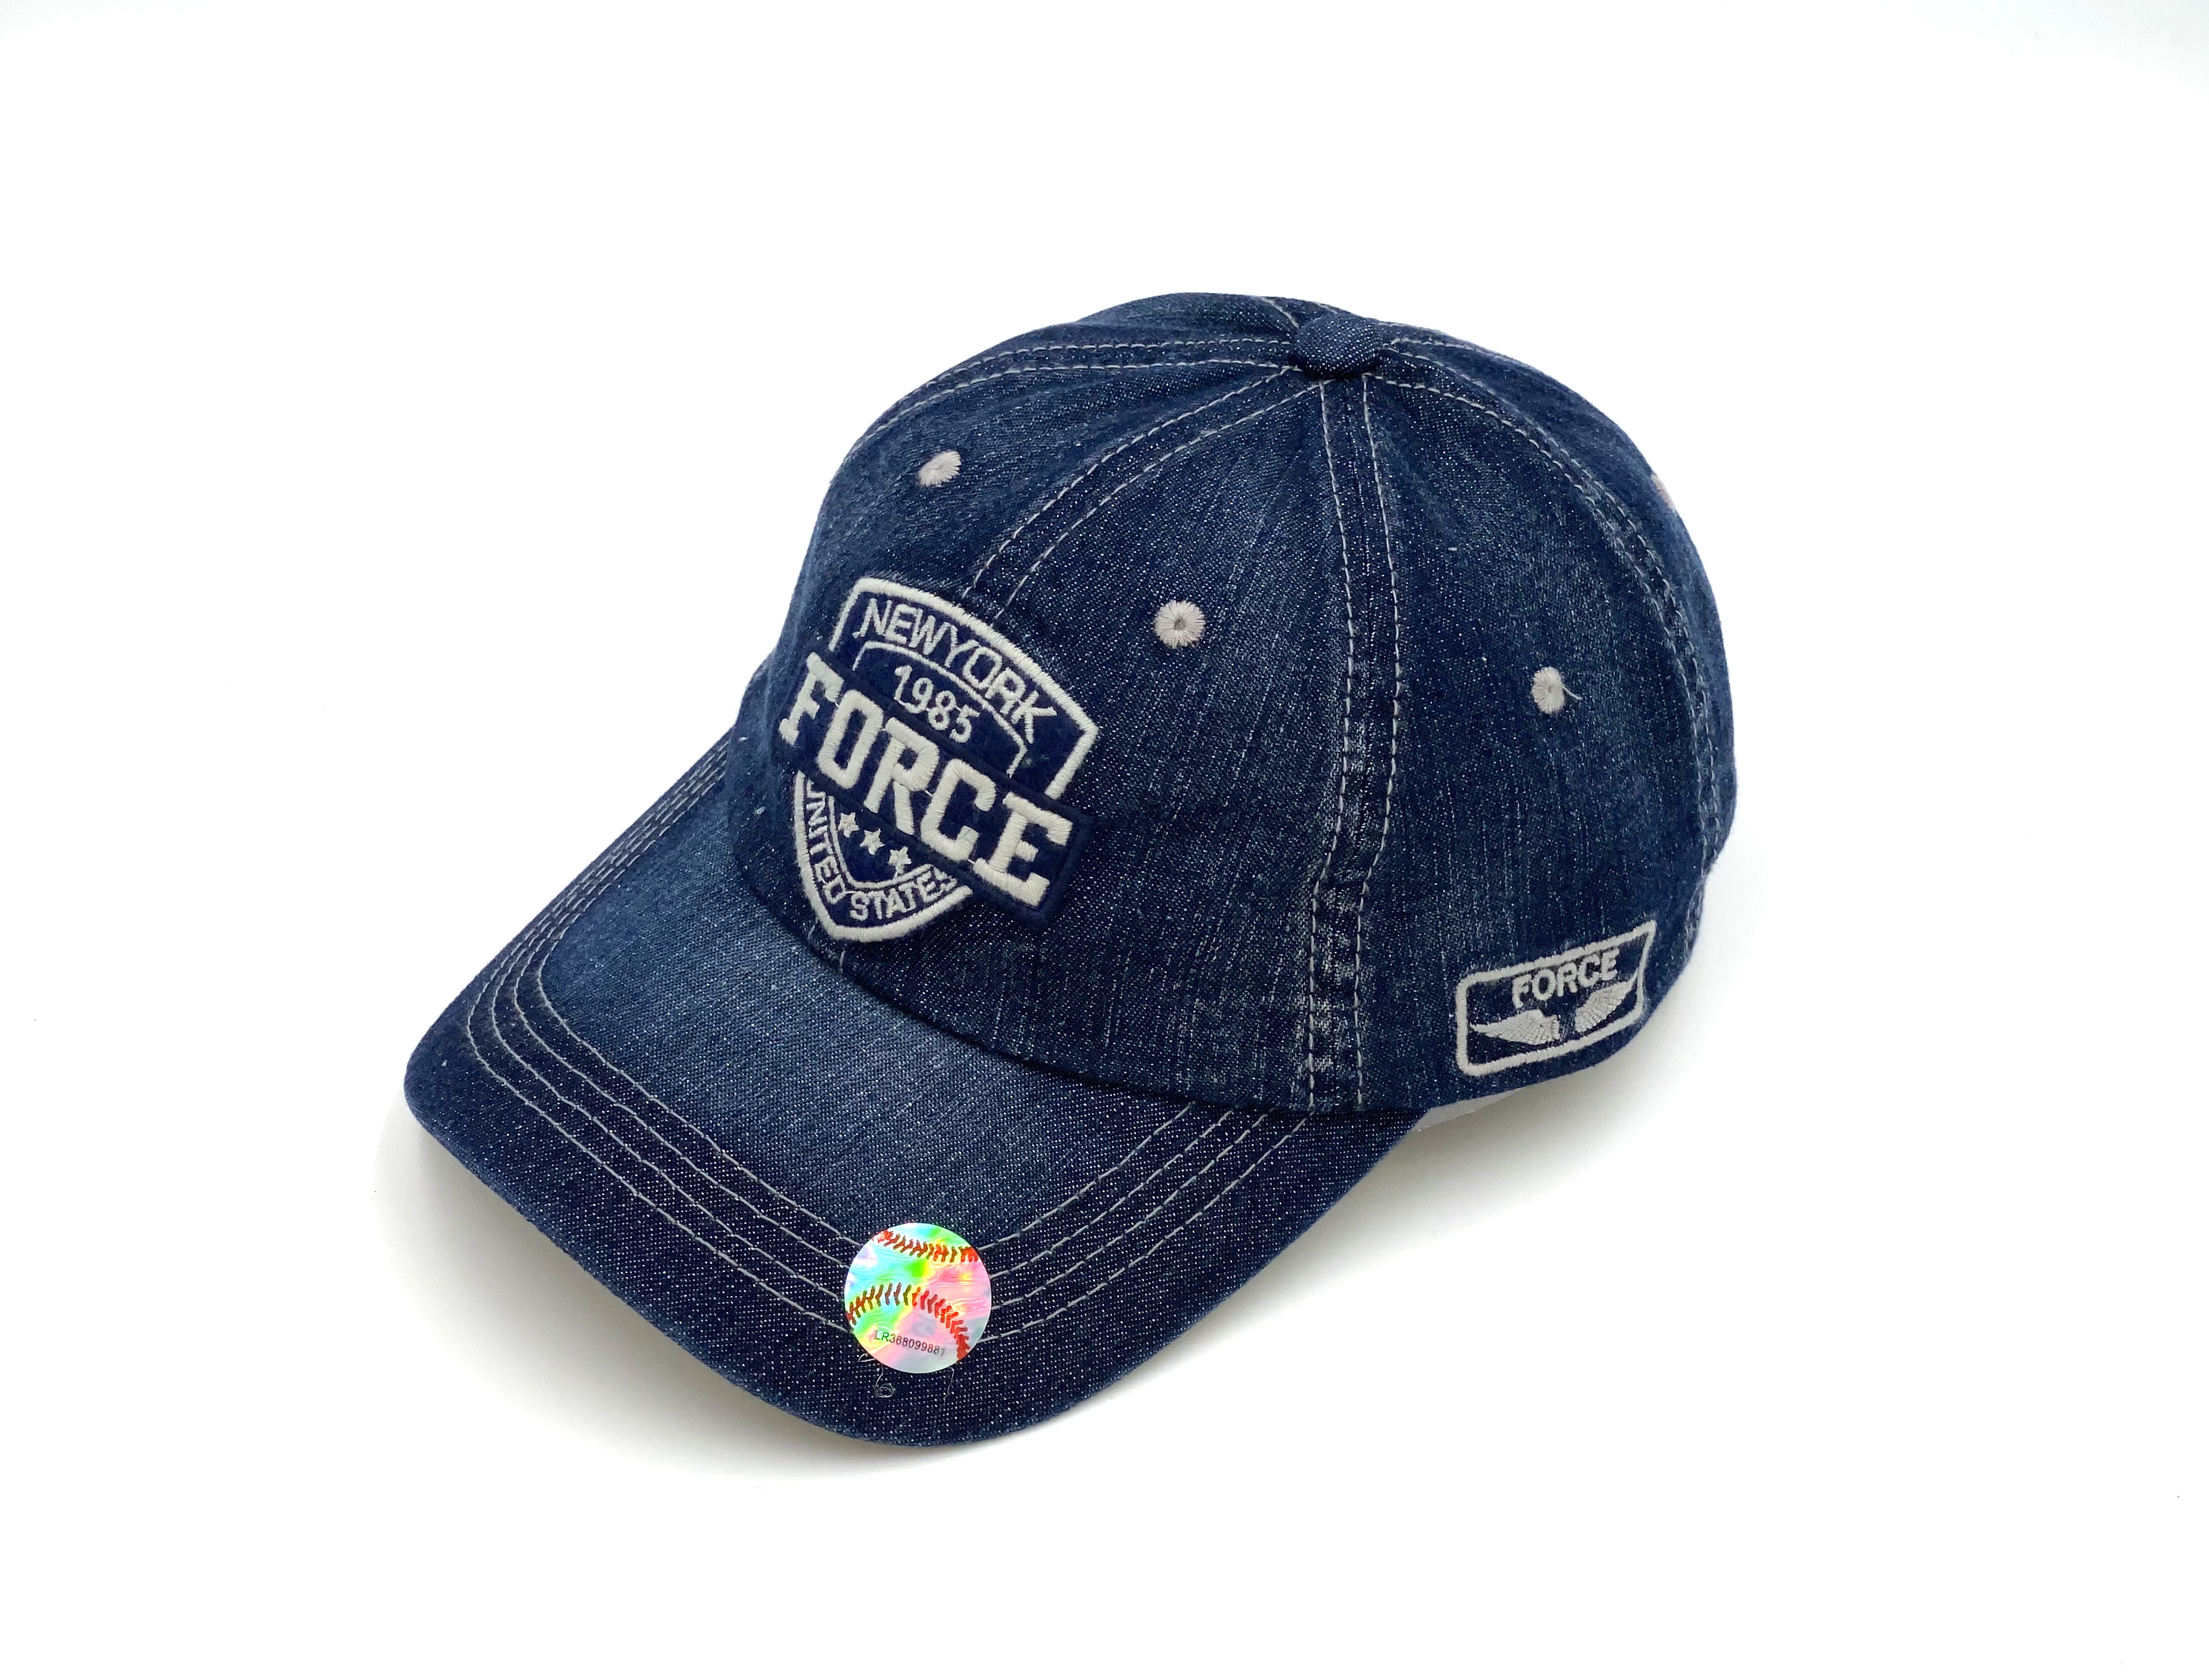 New York Force Jeans Cap